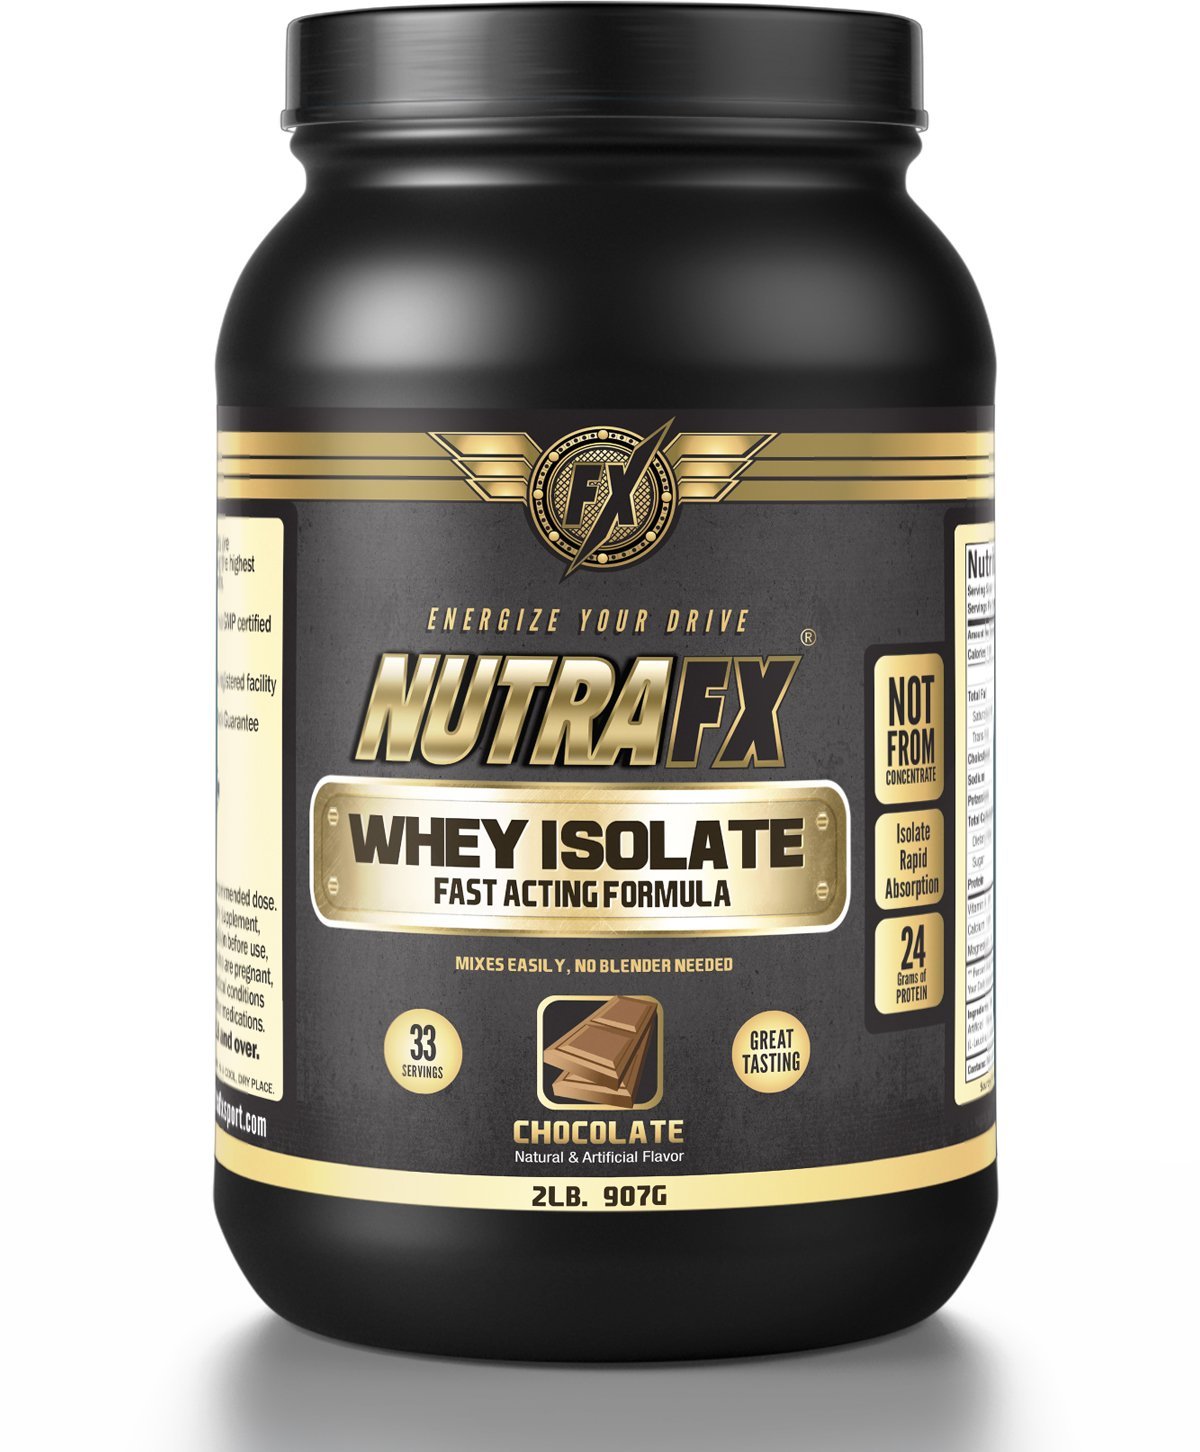 NutraFX Whey Isolate | News, Reviews, & Prices at PricePlow.